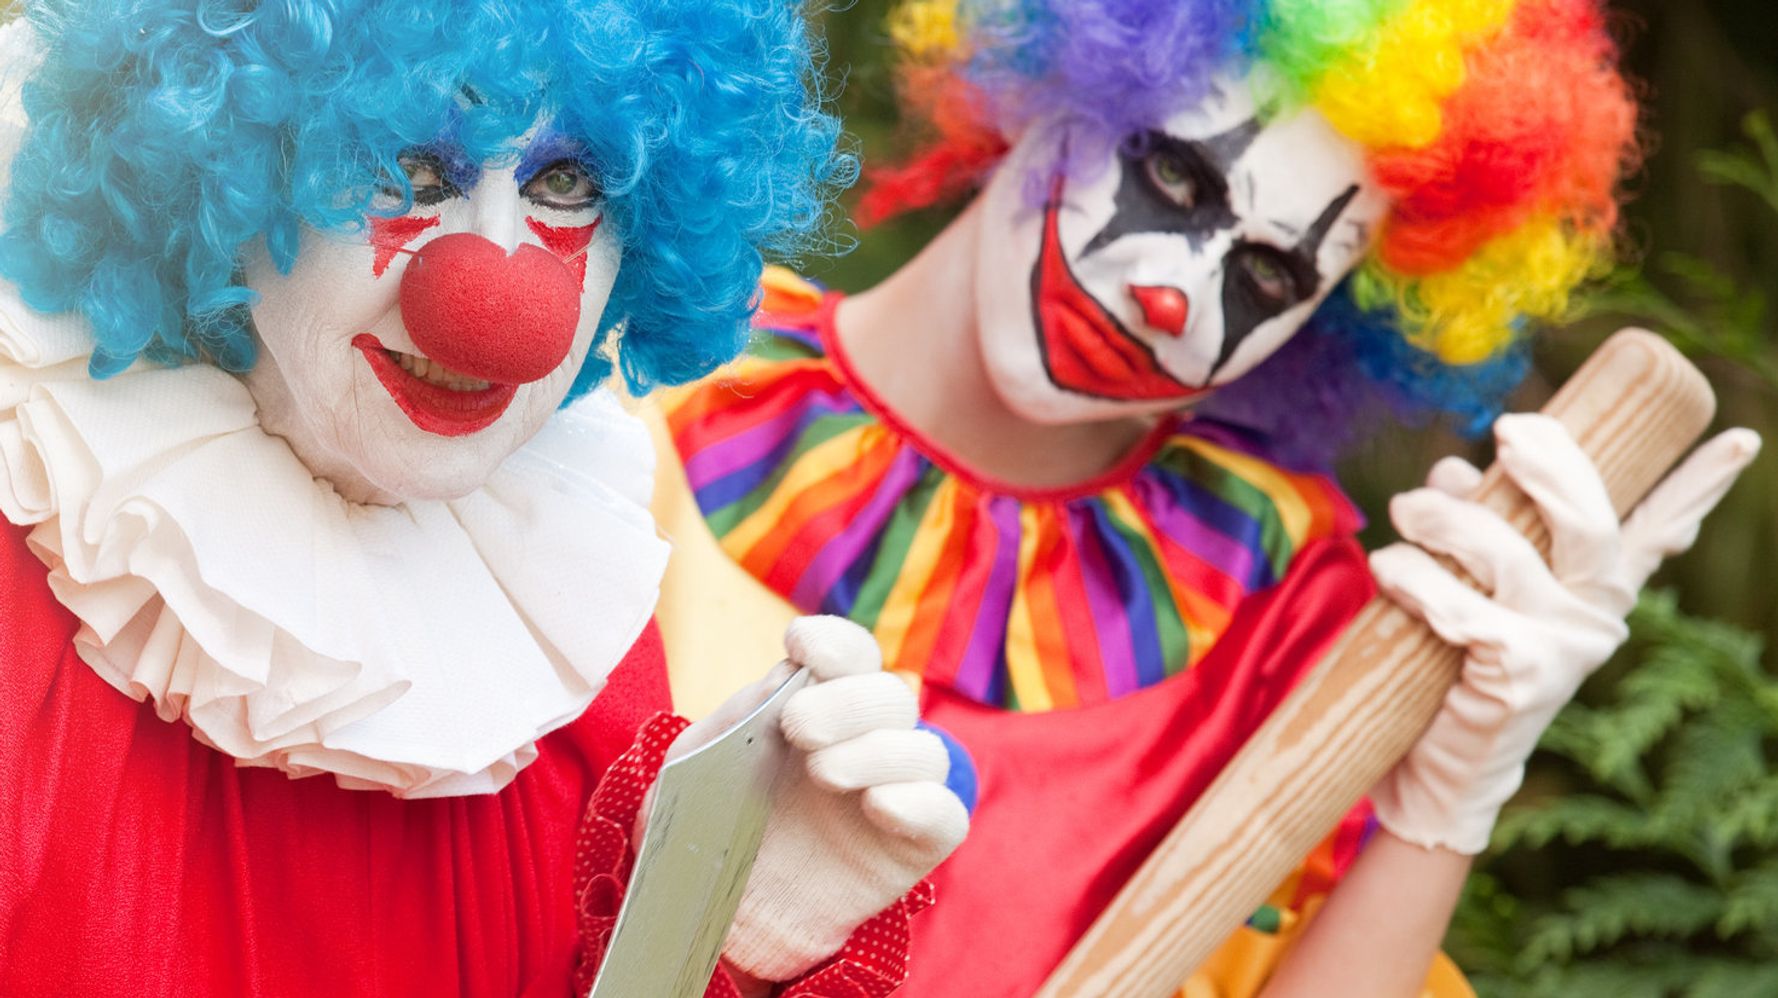 Creepy Clown Threat Prompts Spooked Floridians To Trick-Or-Treat While Arme...